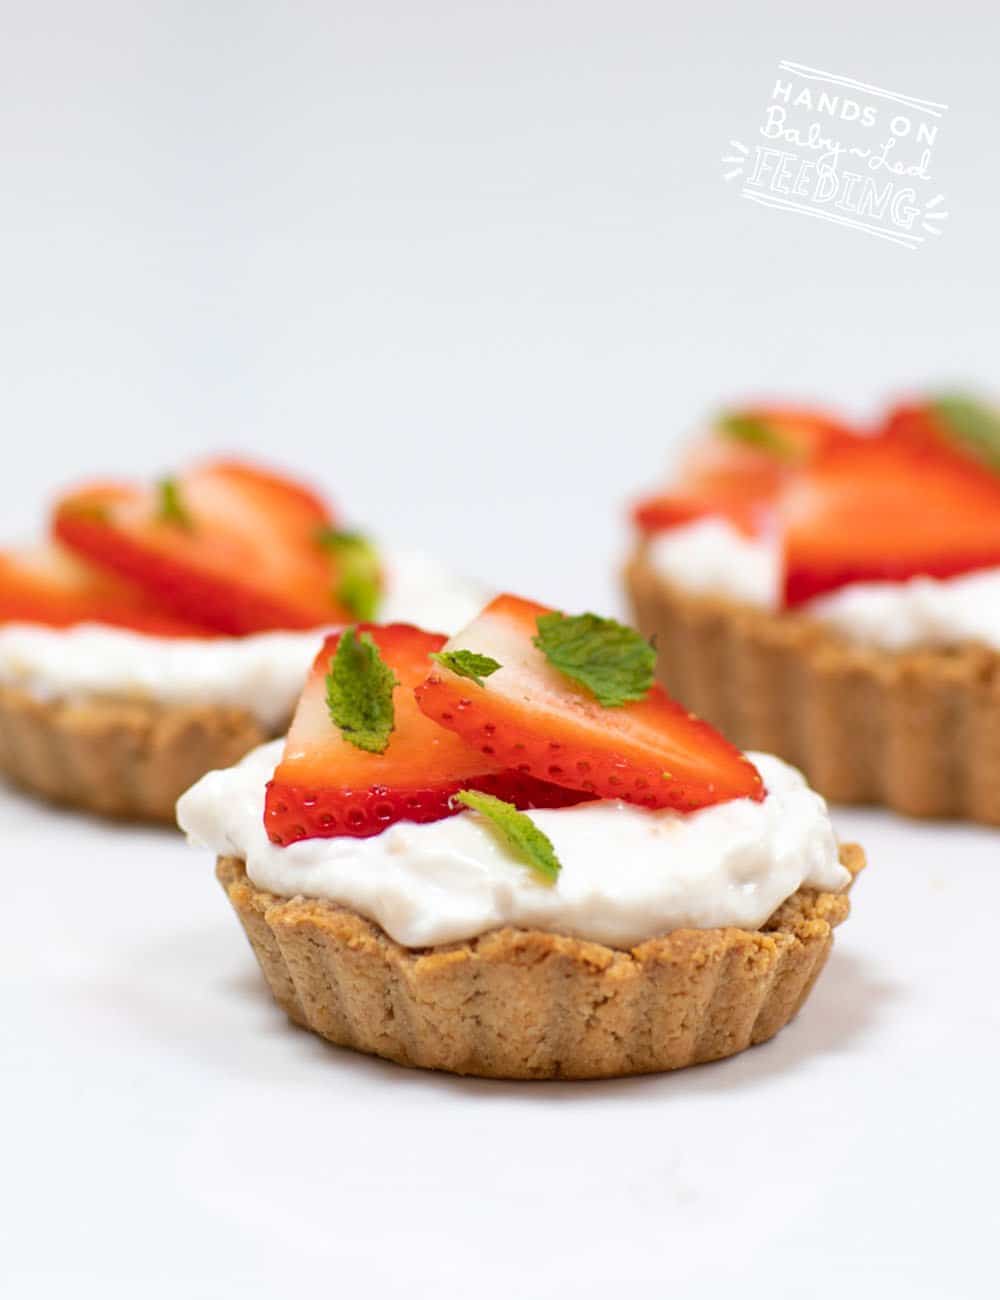 Strawberry Cream Tarts for baby led weaning are an easy healthy treat for the entire family. The simple oat crust crumbles gently making it safe for baby. A Greek yogurt cream filling lightly sweetened naturally with bananas. #babyledweaning #babyledfeeding #tarts #refinedsugarfree #healthytreats #strawberryrecipe